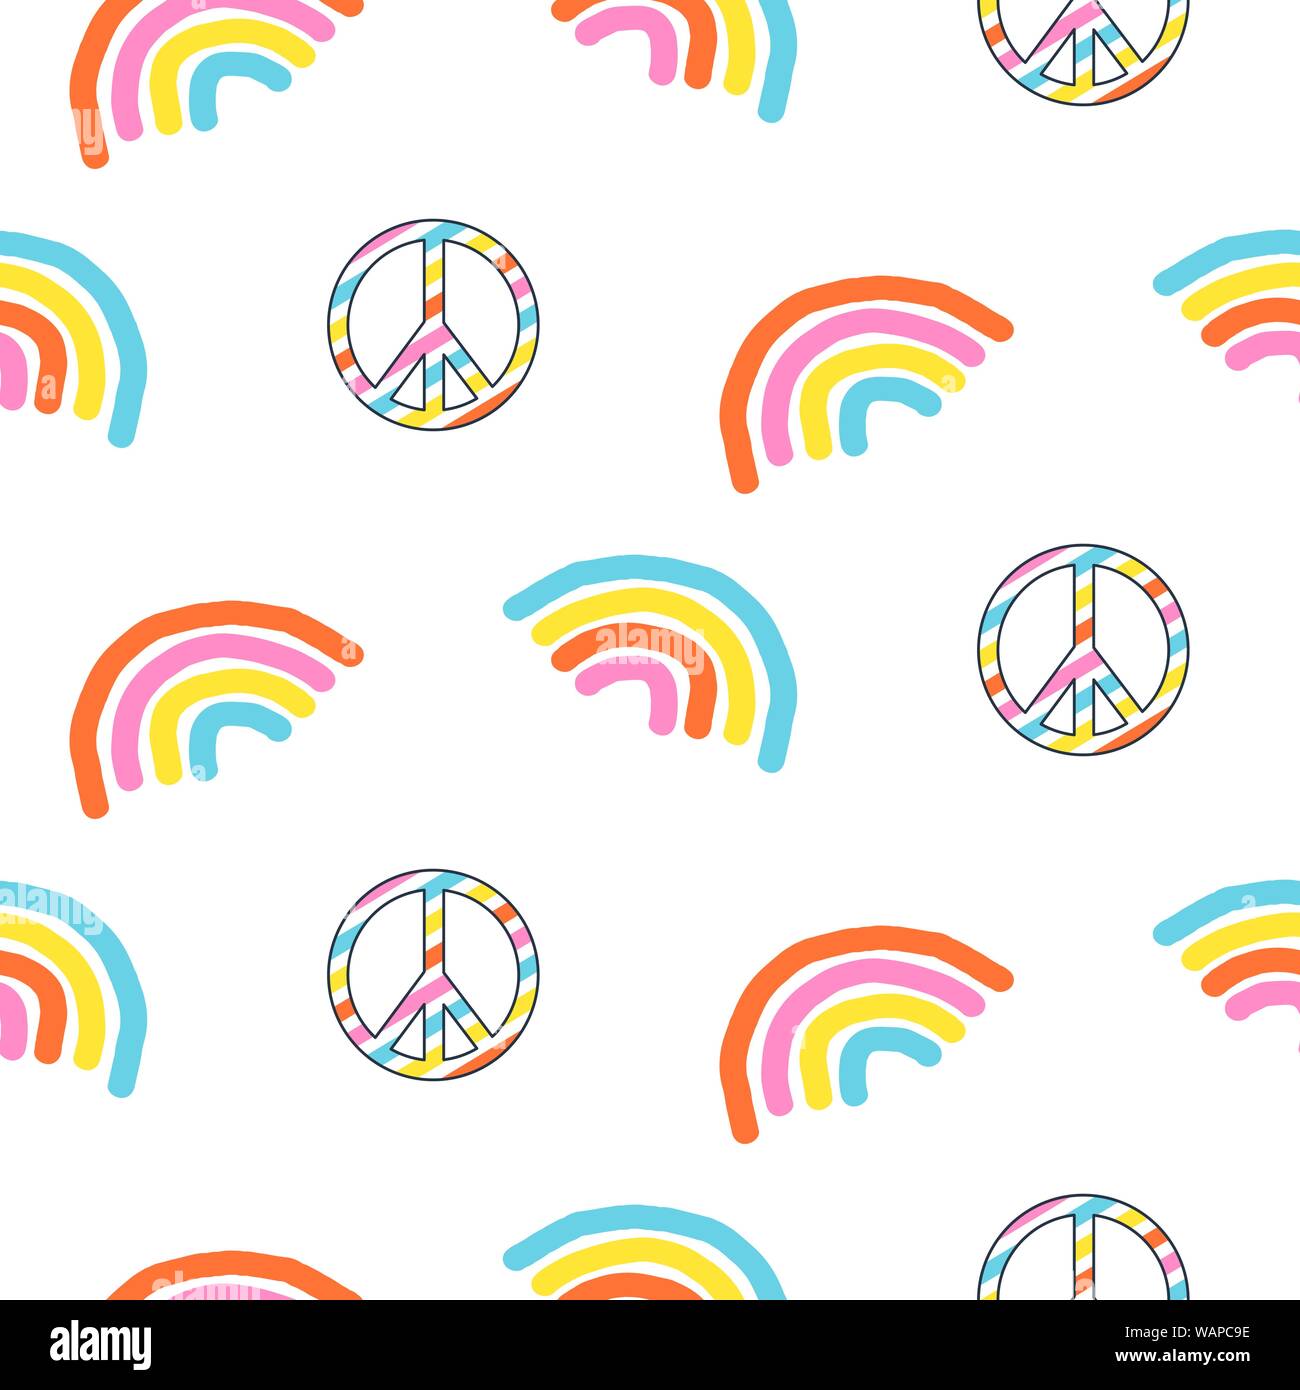 Seamless pattern with rainbow and peace symbol. Stock Vector